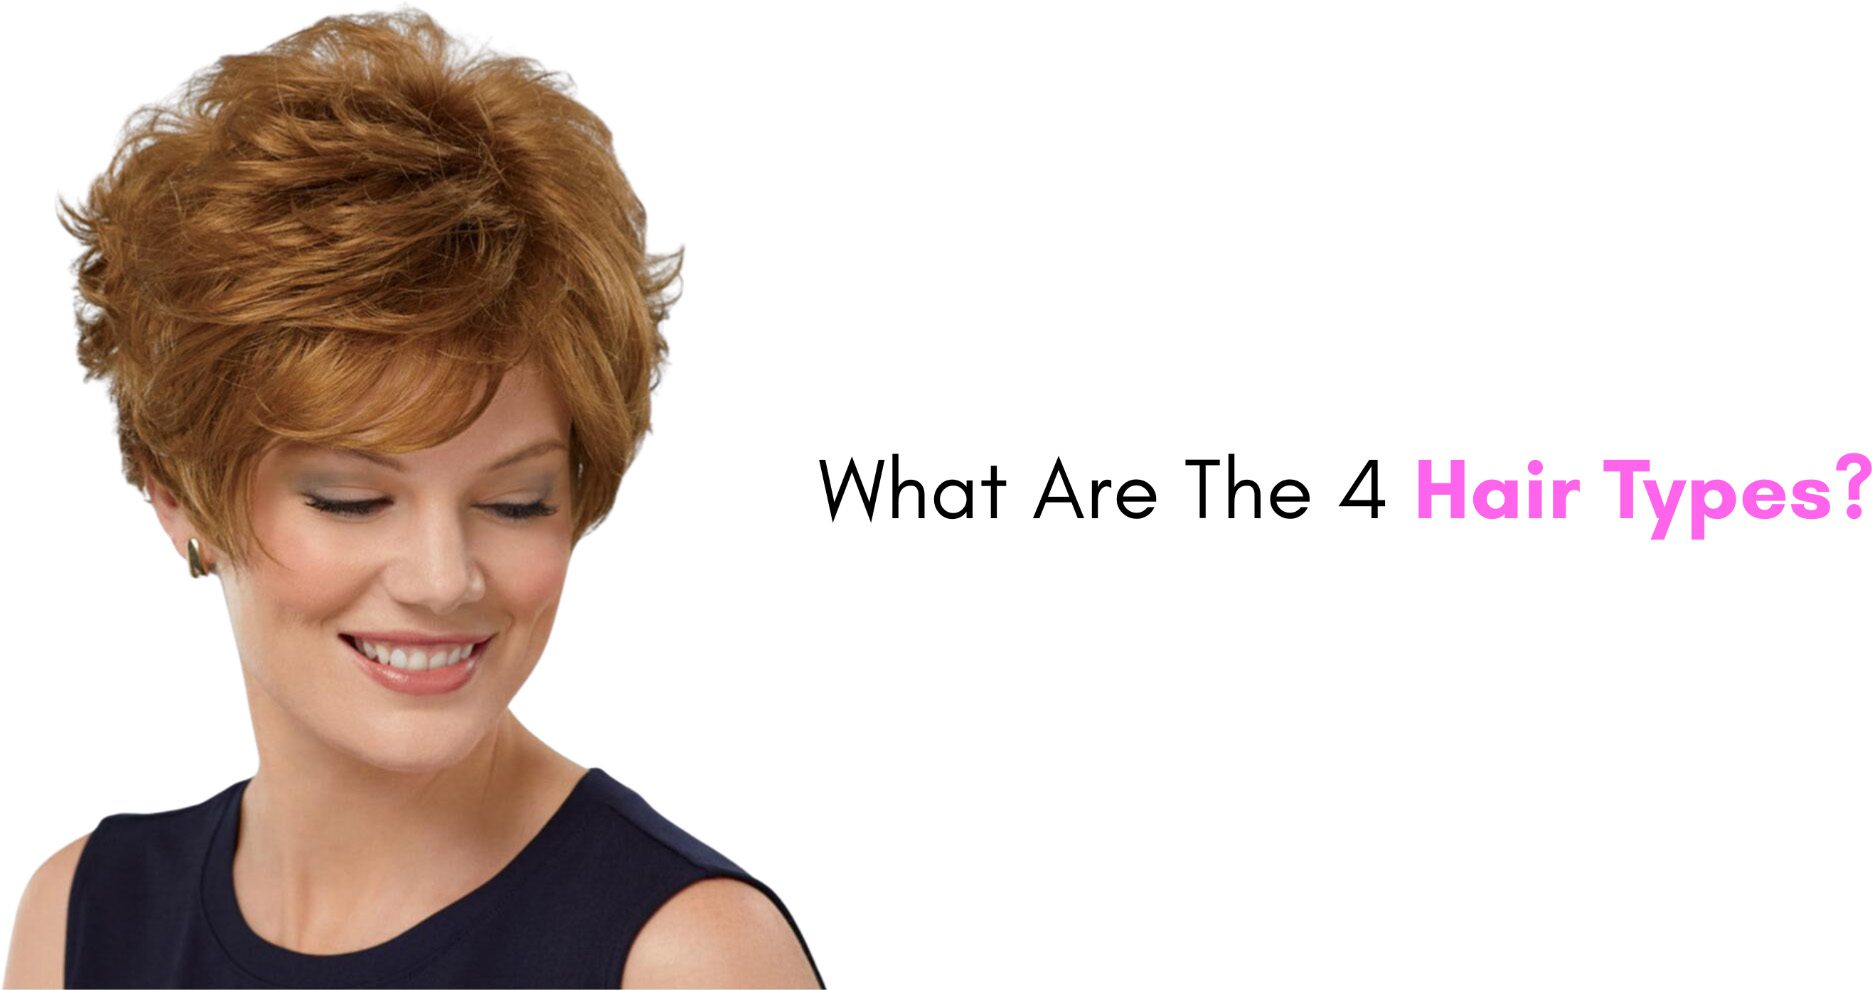 What Are The 4 Hair Types?